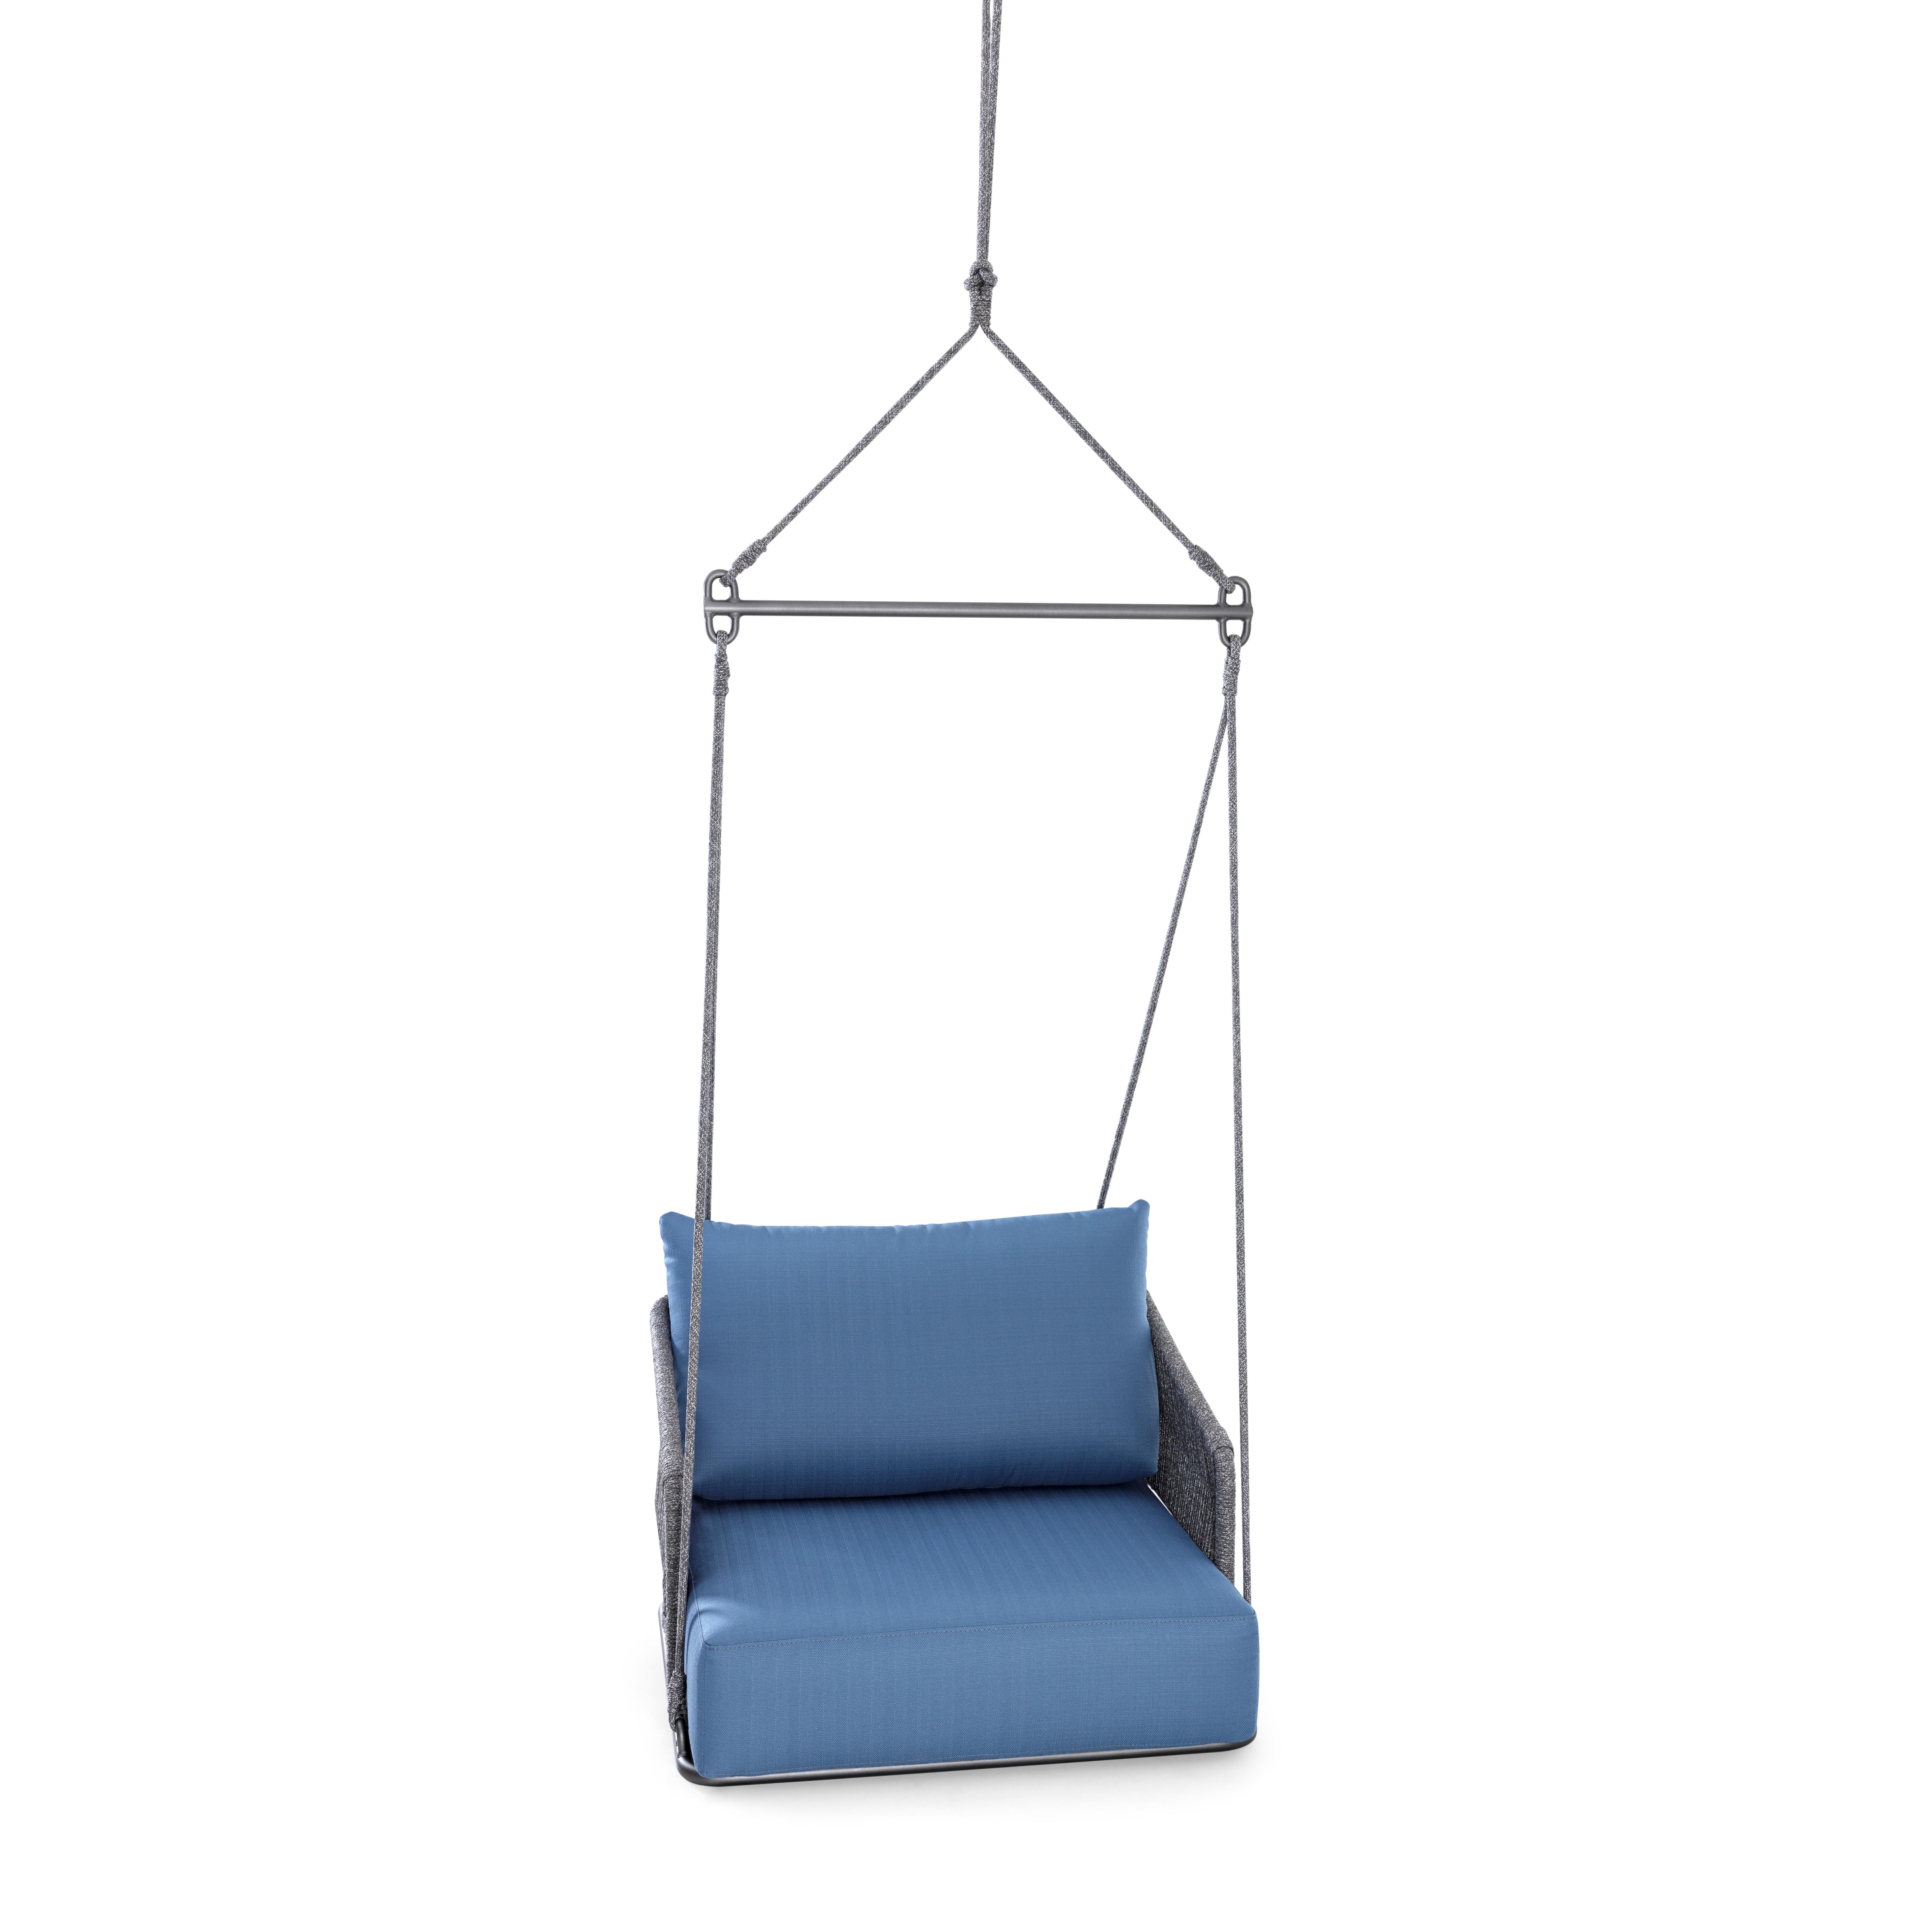 Uultis' popular Gig swing is a unique addition to everyone's outdoor environment. The nautical rope that interweaves with the elegant lines of the frame and helps support the hanging chair is a reminder of the ocean breeze on a hot summer day. The